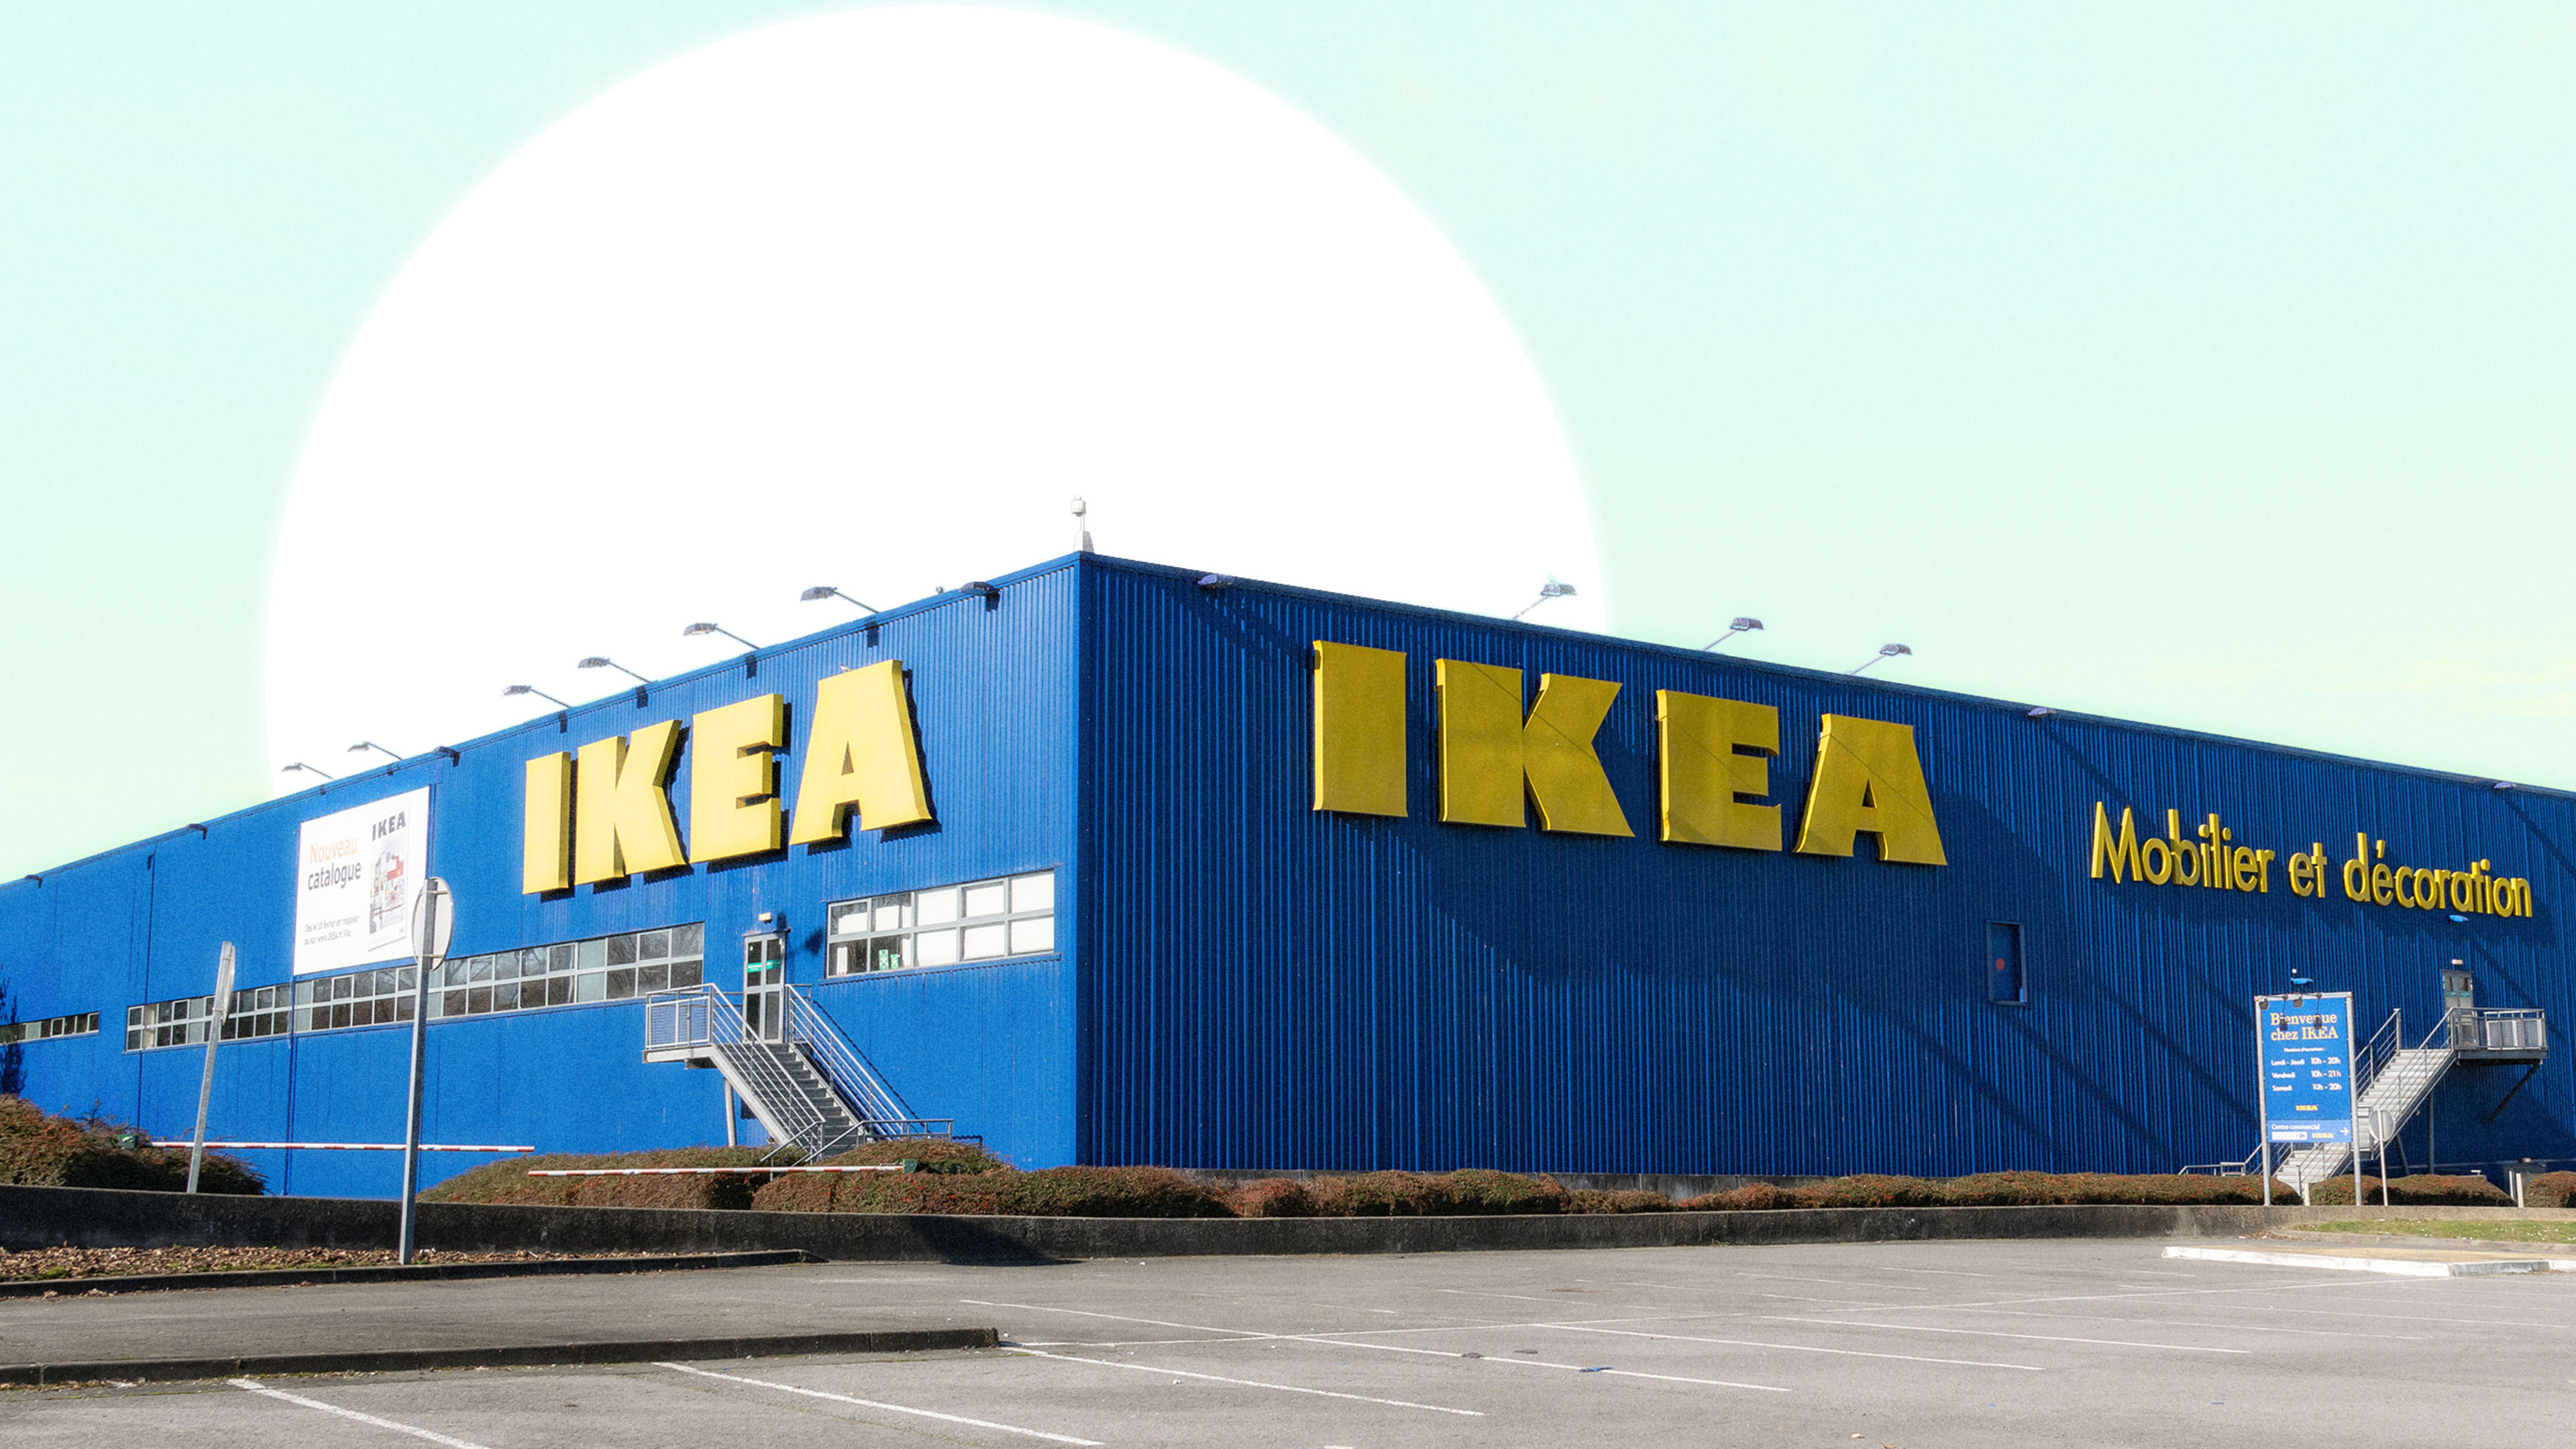 Ikea just invested in two giant solar farms